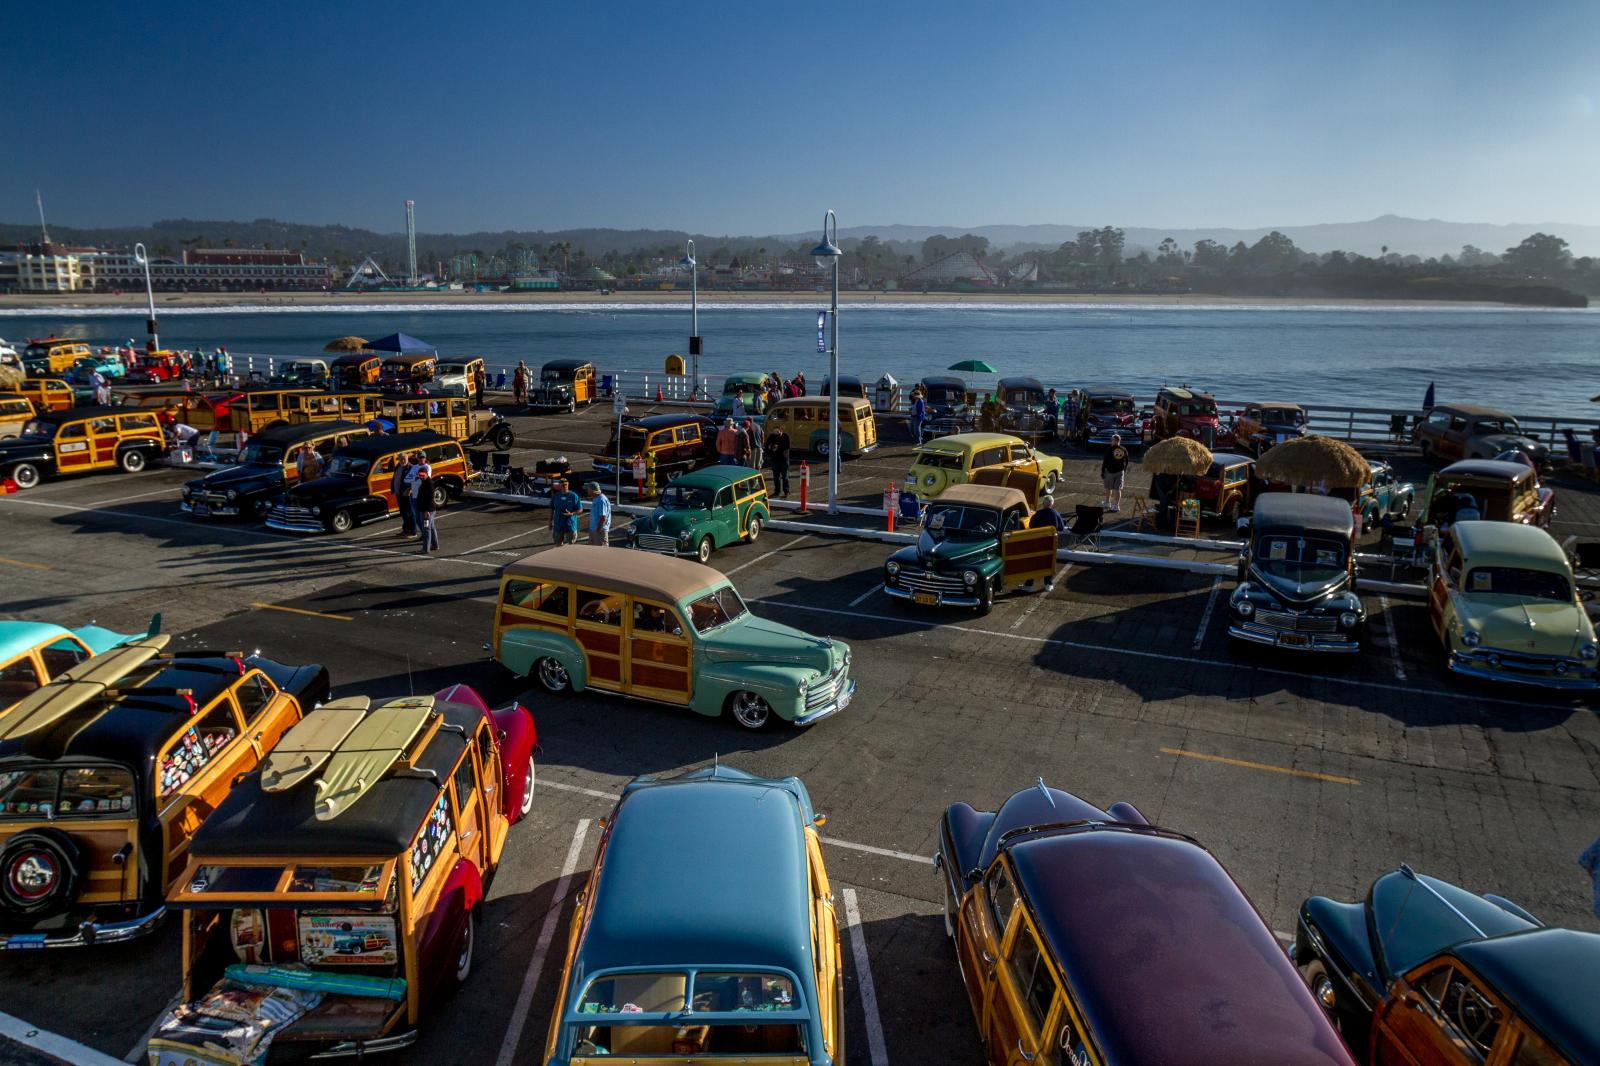 Woodies on the Wharf | Buy this image